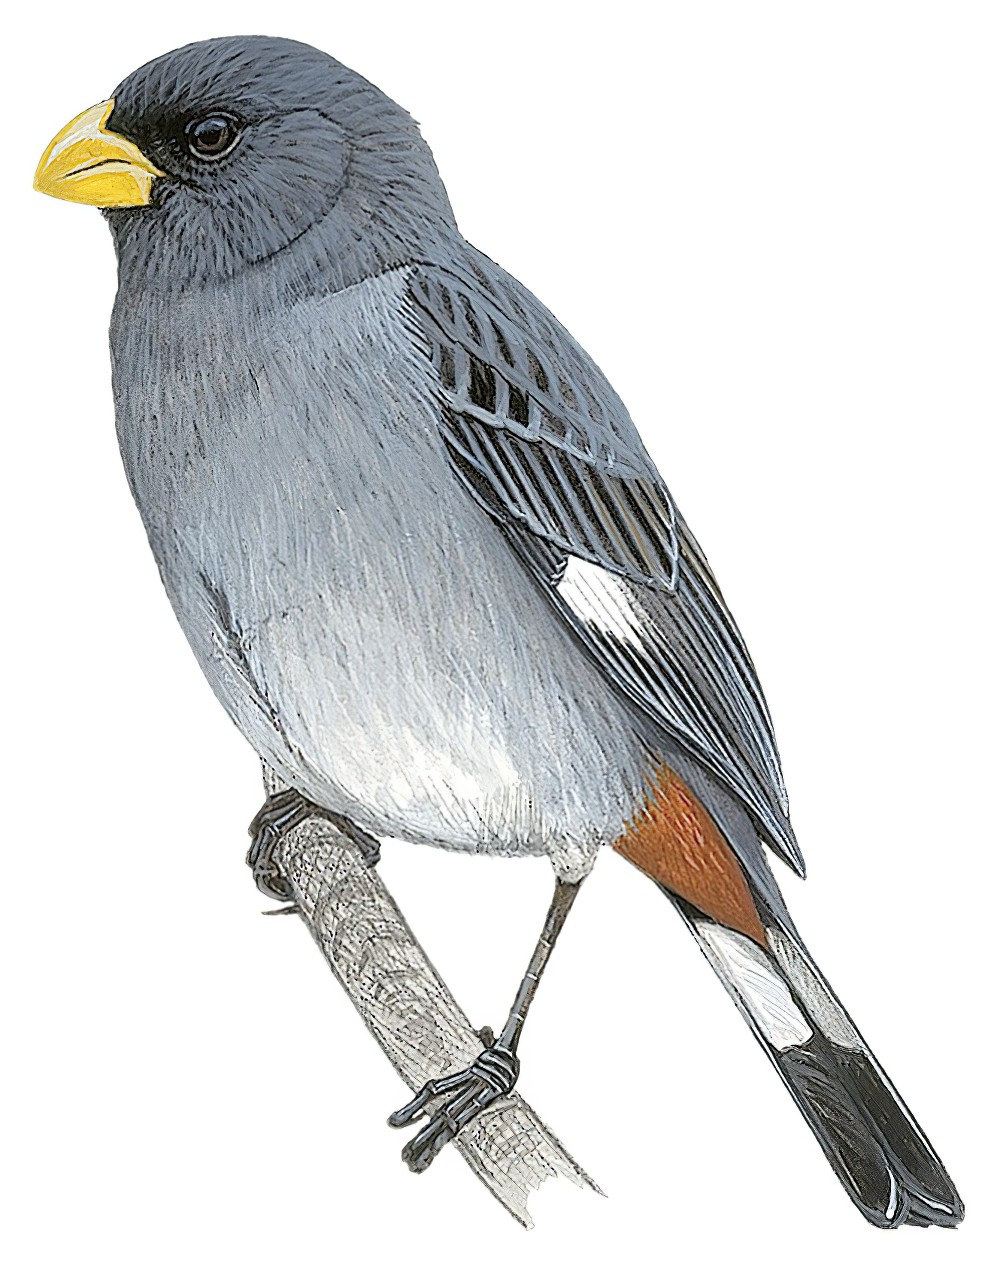 Band-tailed Seedeater / Catamenia analis